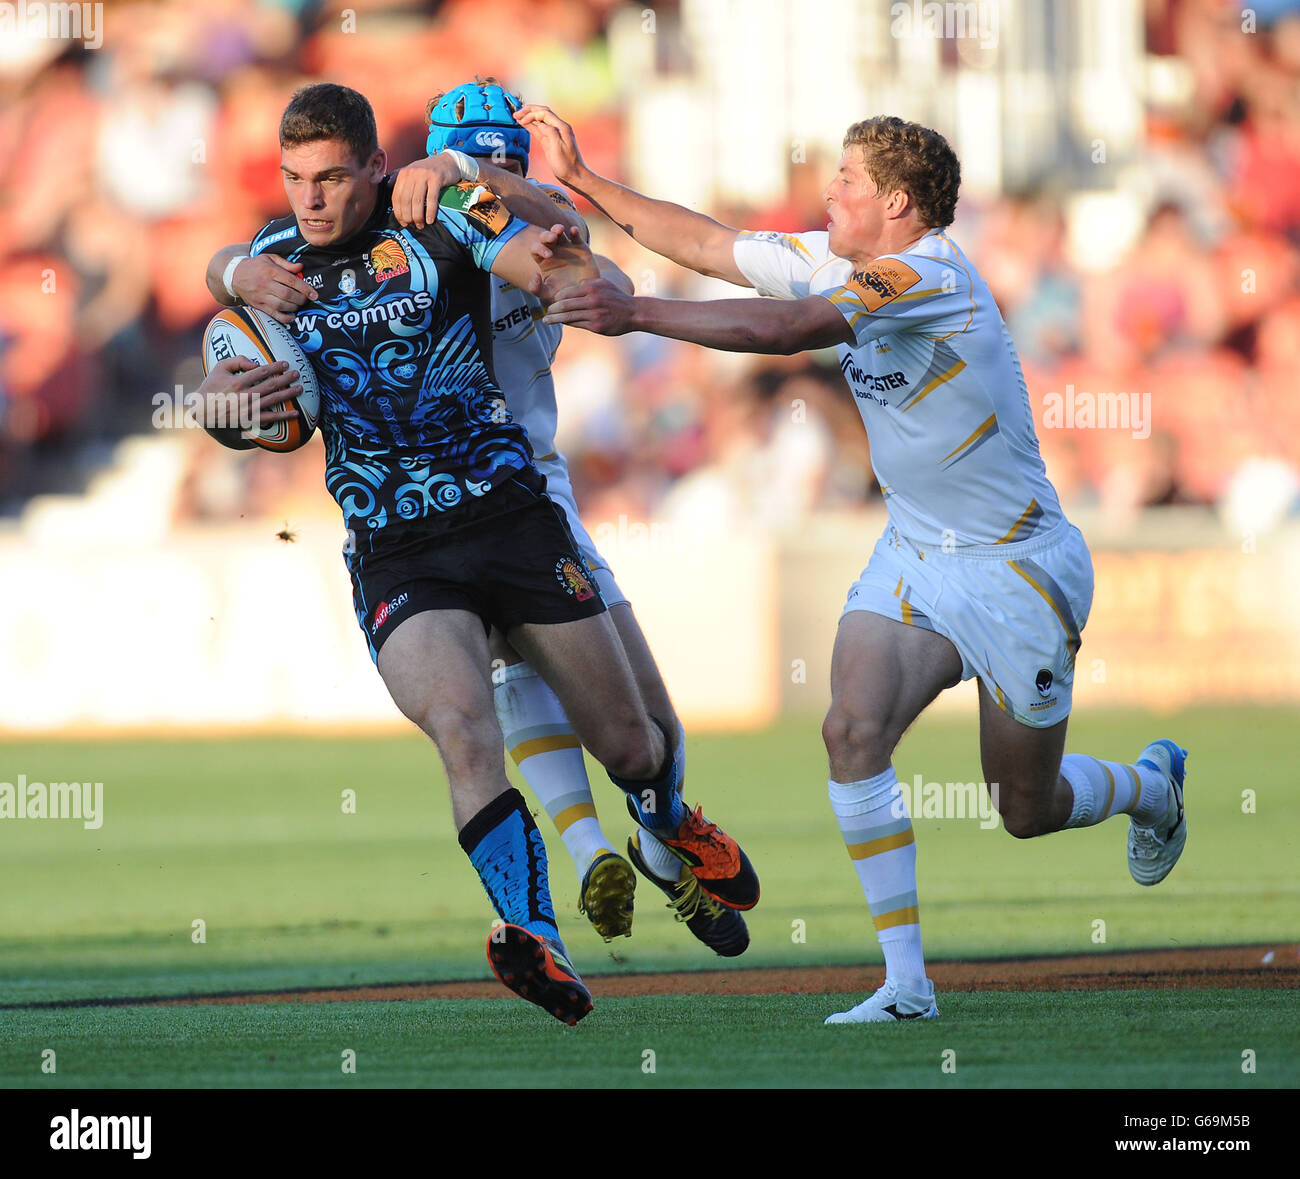 Exeter Chiefs 7's Chris Elder is tackled by Worcester Warriors 7's Richard De Carpentier and Max Stelling during the Group A match of the J.P. Morgan Asset Management Premiership Rugby 7's at Kingsholm Stadium, Gloucester. Stock Photo